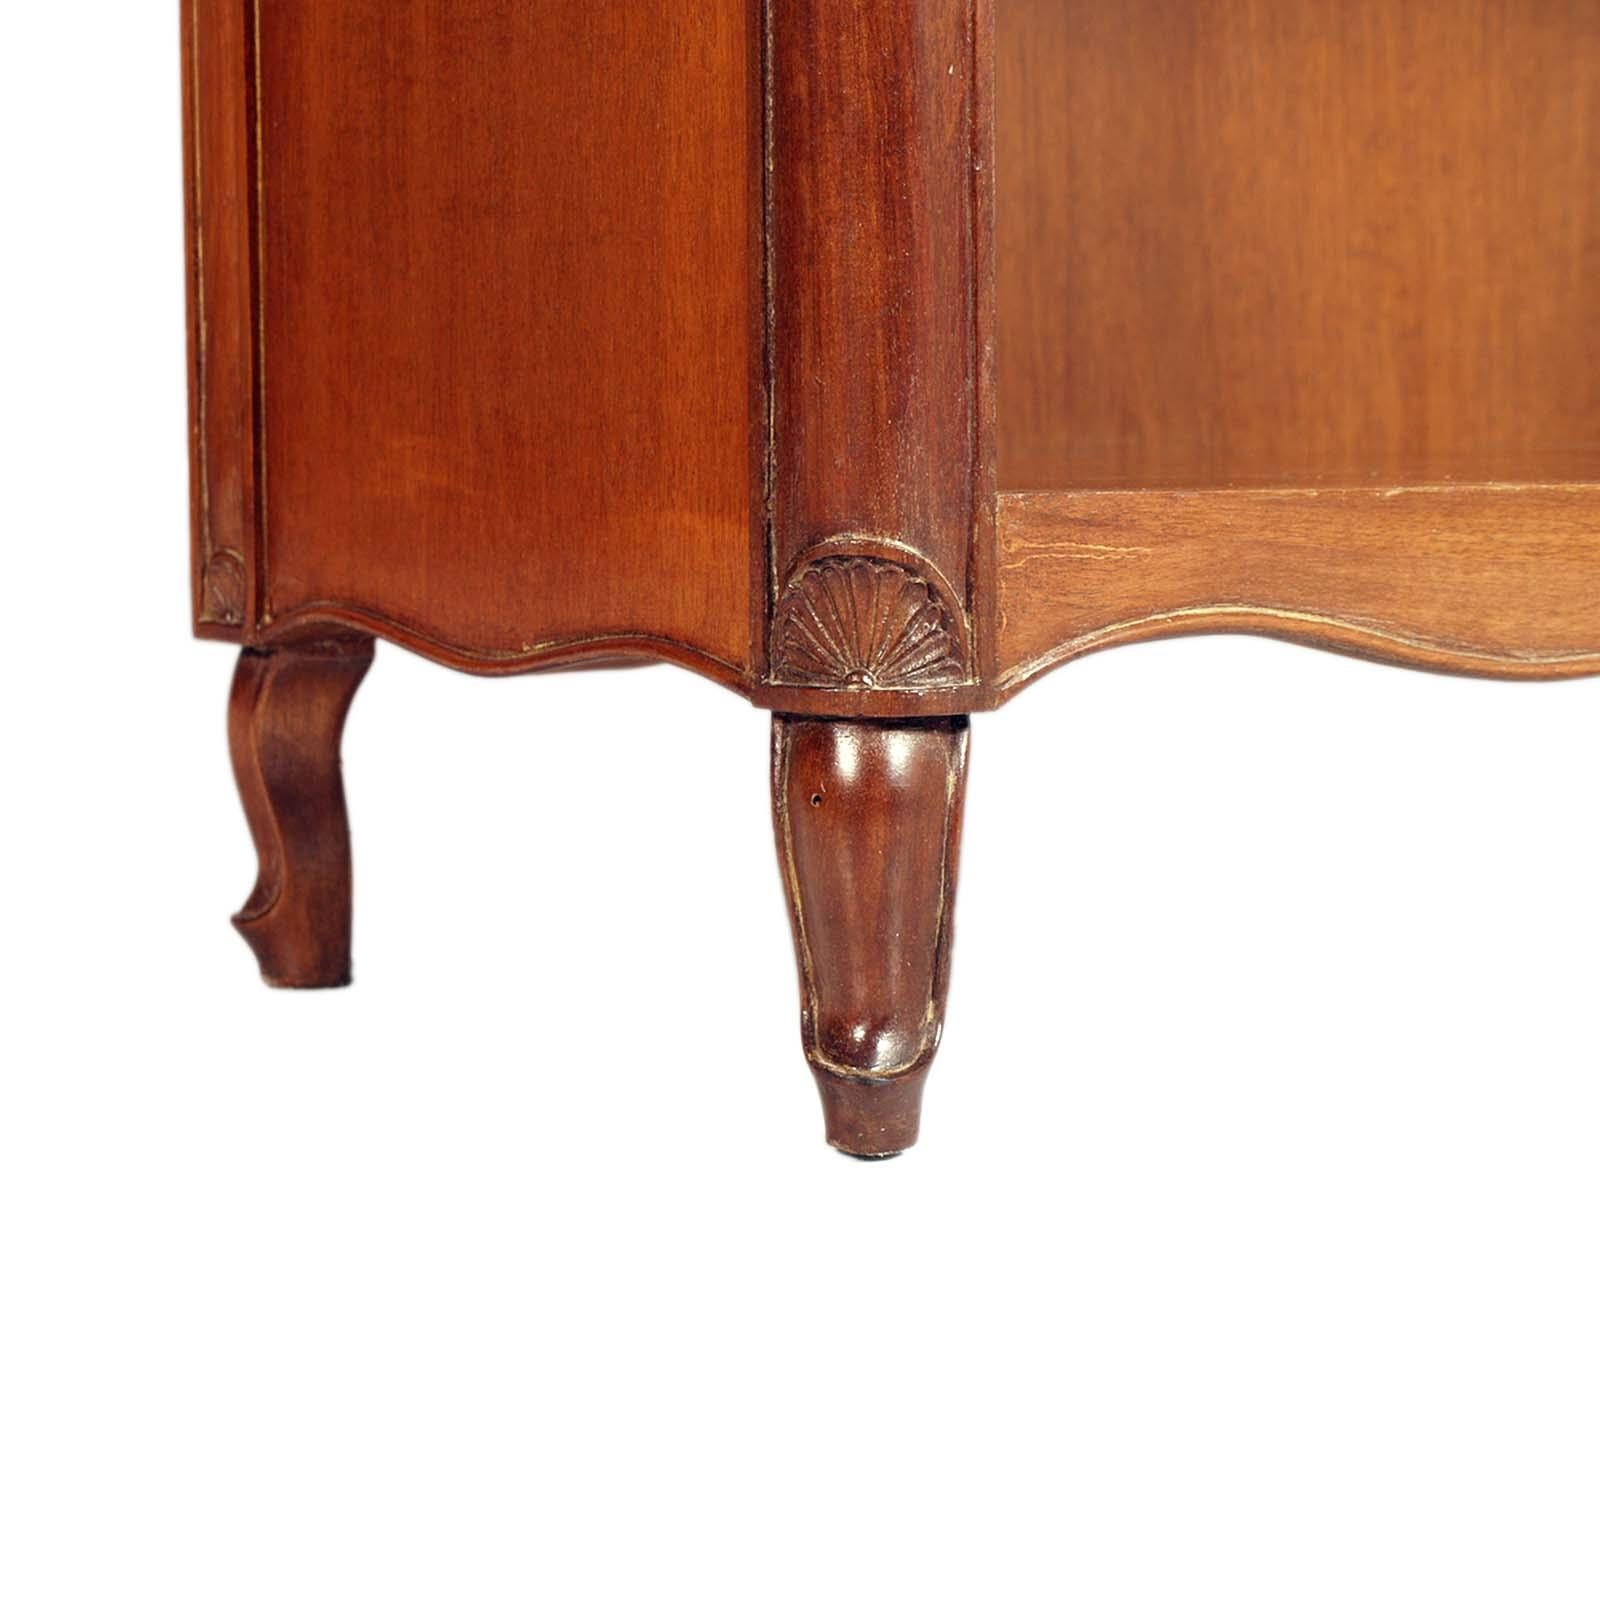 Neoclassical Revival 1930s Open Bookcase in Neoclassical Carved Mahogany, by Bassano's Ebanistery For Sale